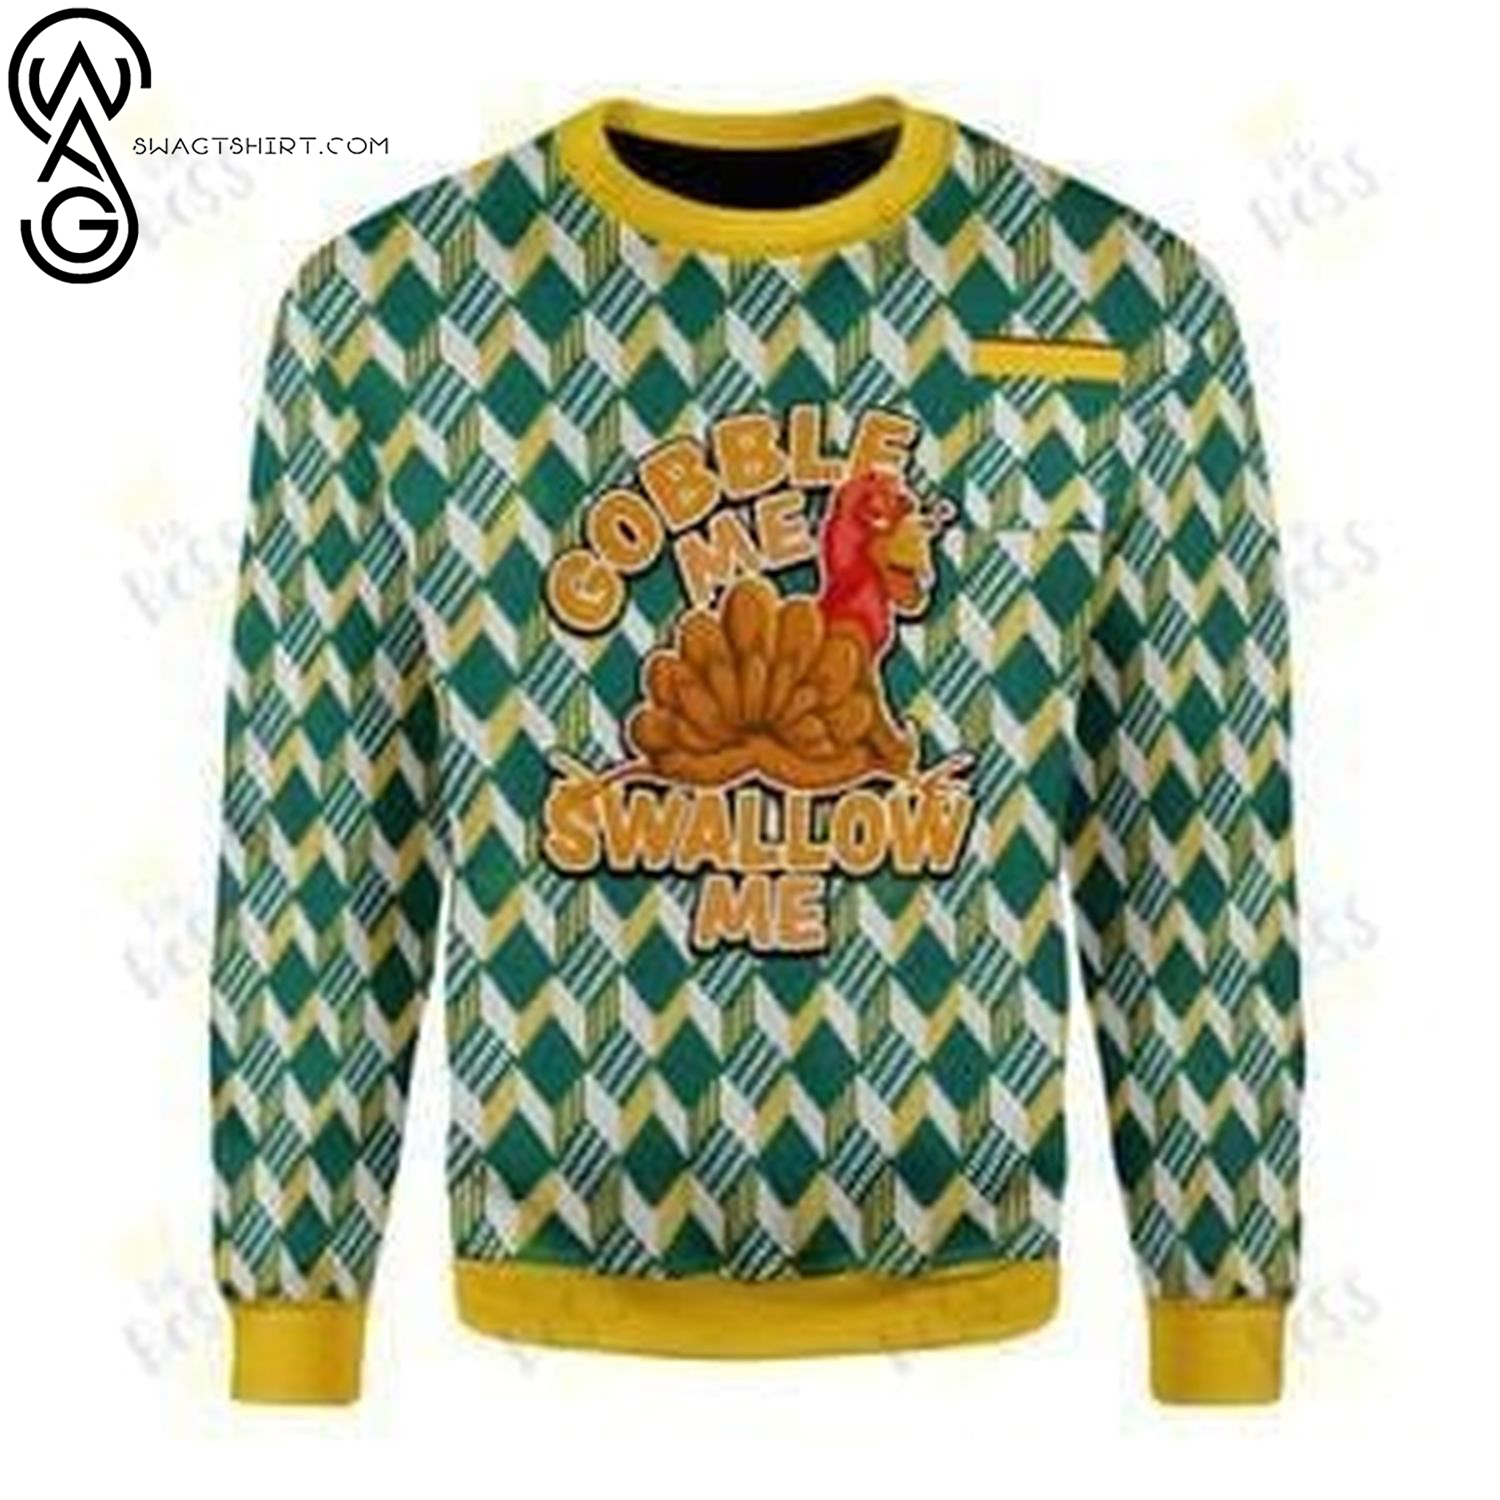 Gobble me swallow me full printing ugly christmas sweater